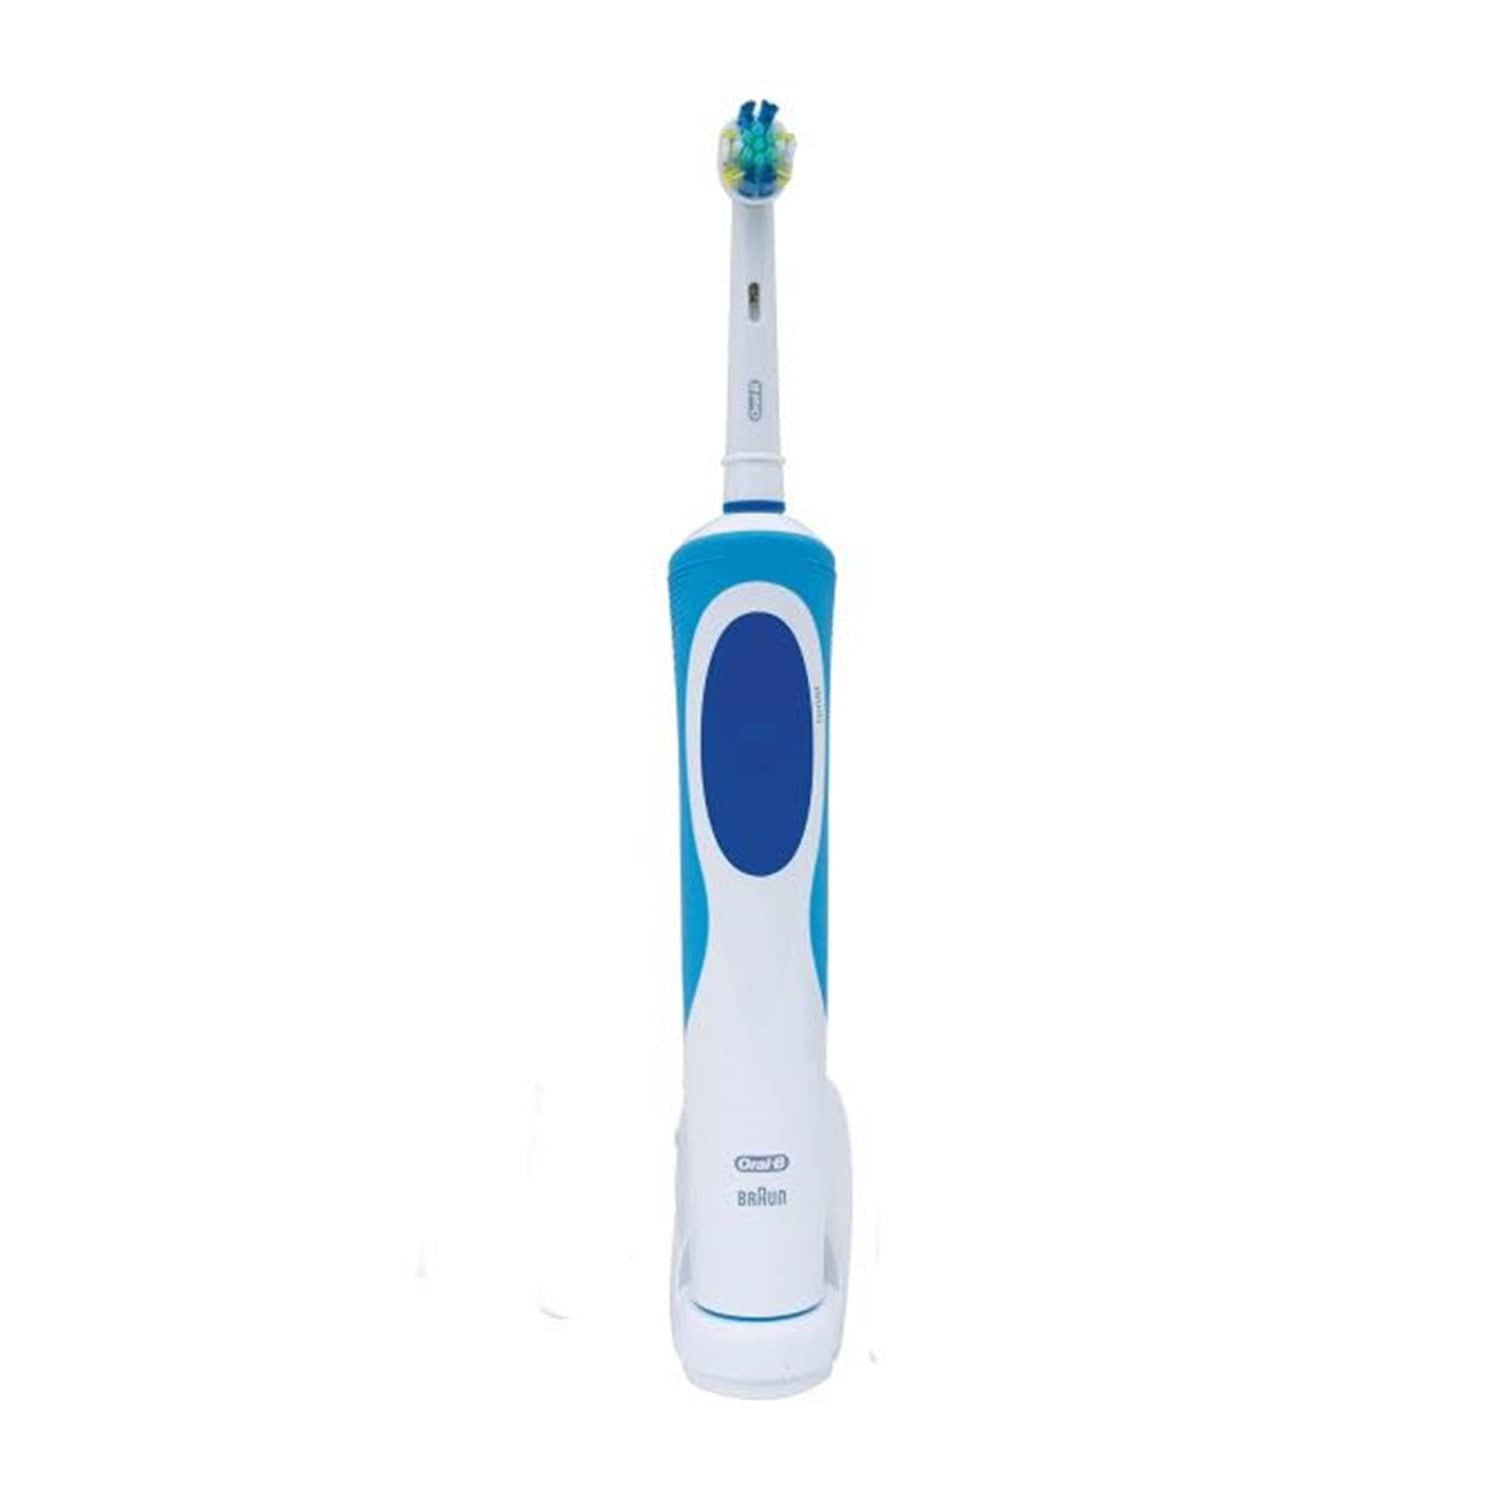 lexicon Ale Theoretisch Braun Oral-B Vitality Pro Electric Toothbrush D12513